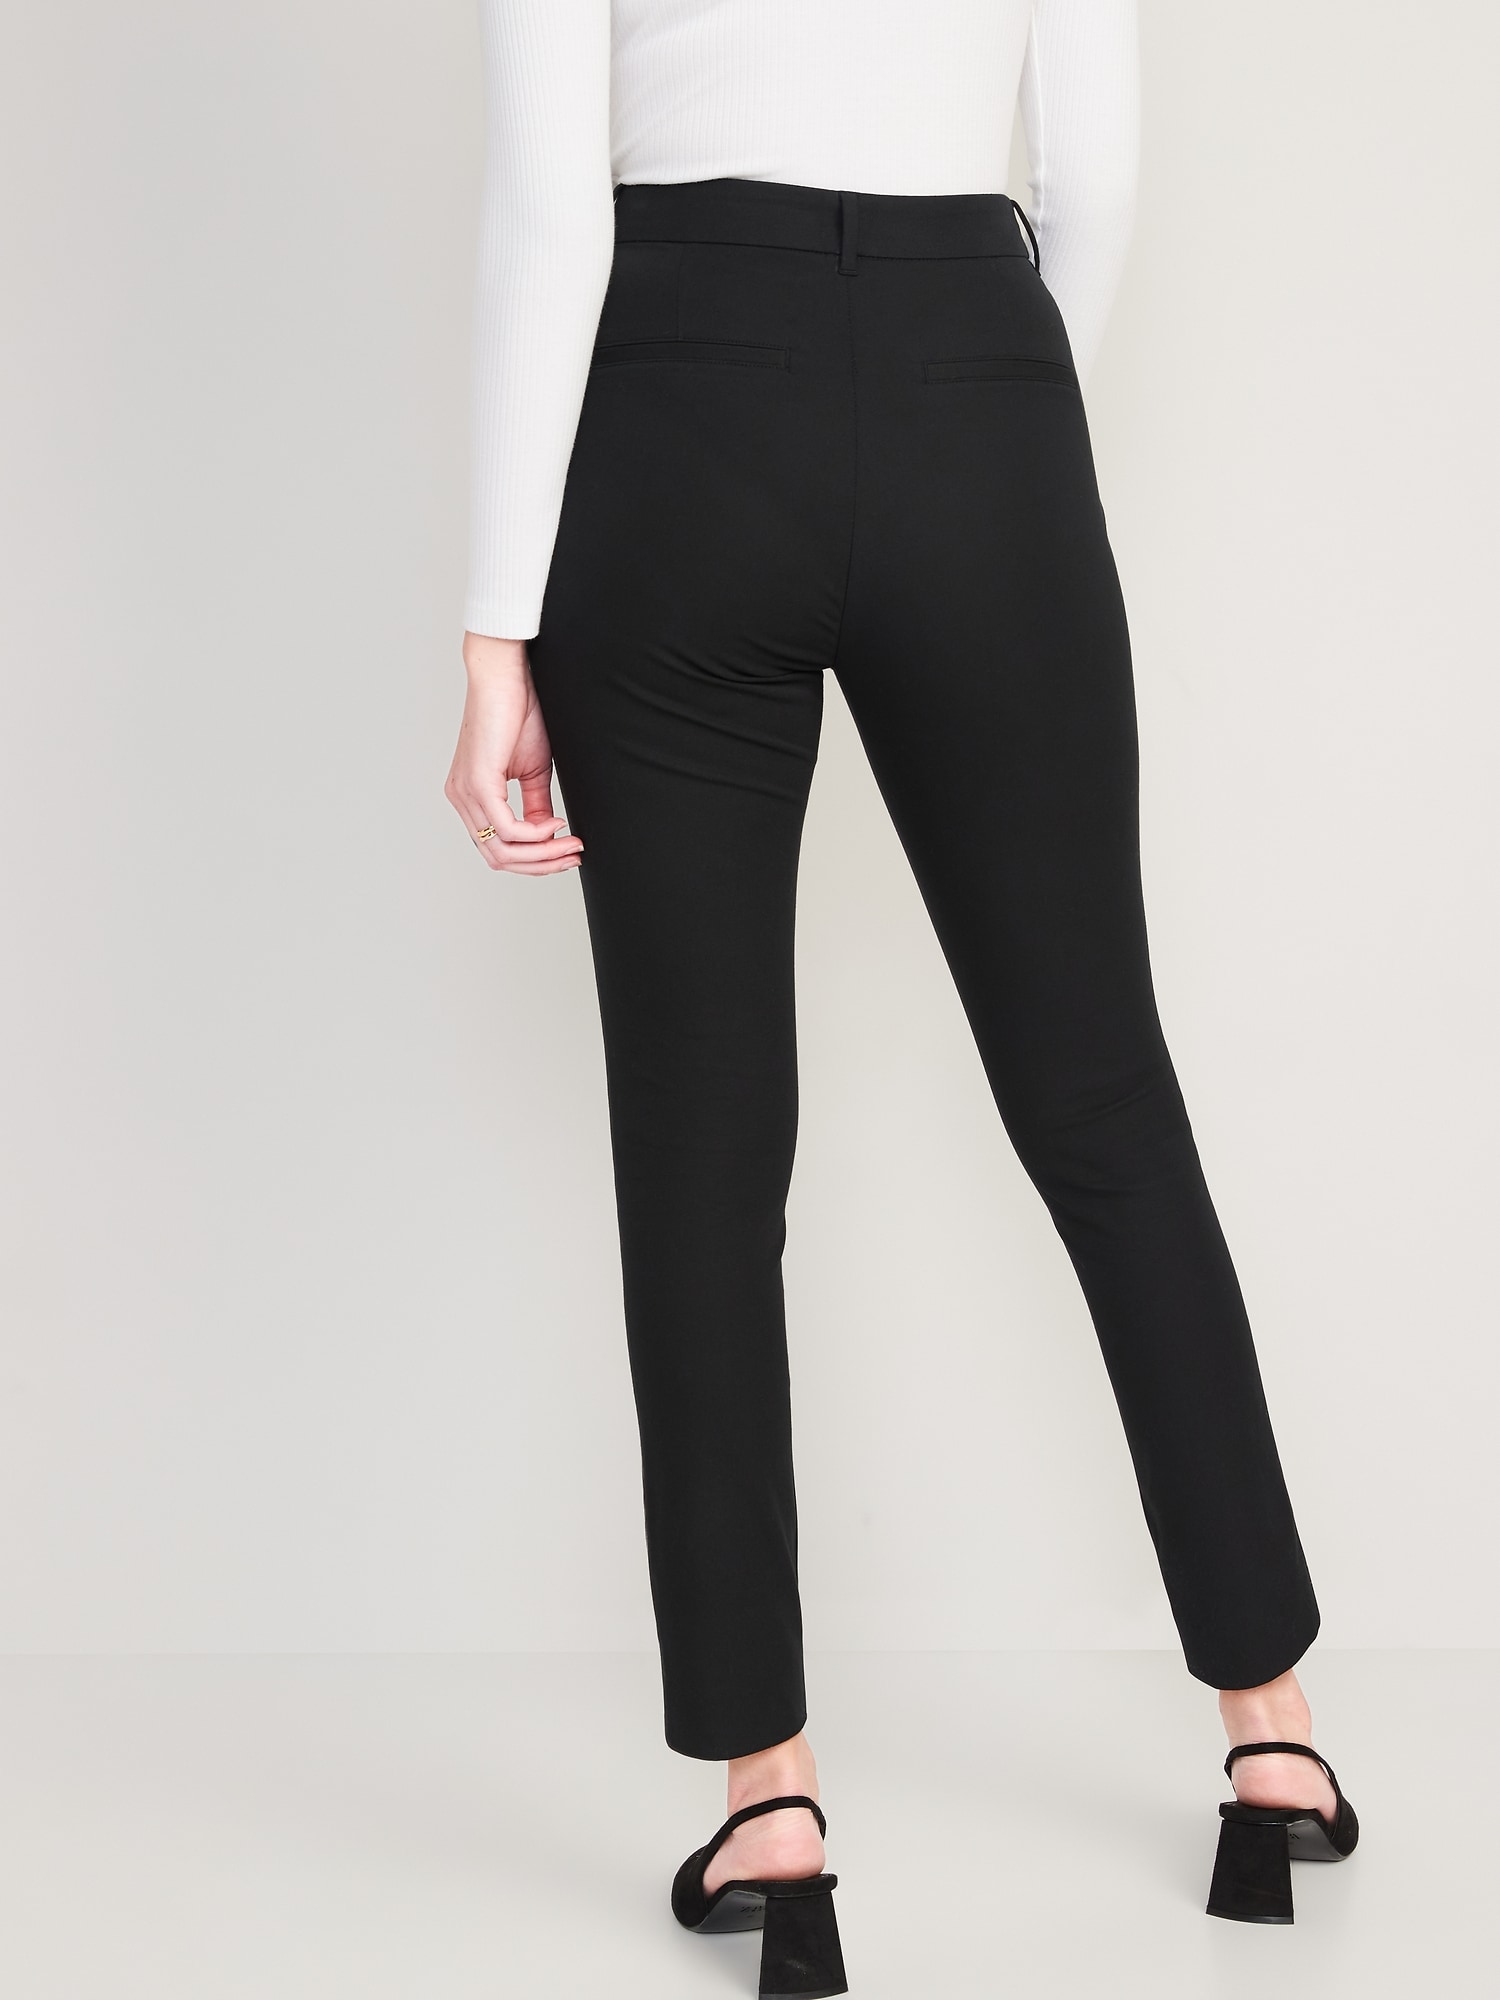 The High Waist Ankle Pant - Curvy Fit